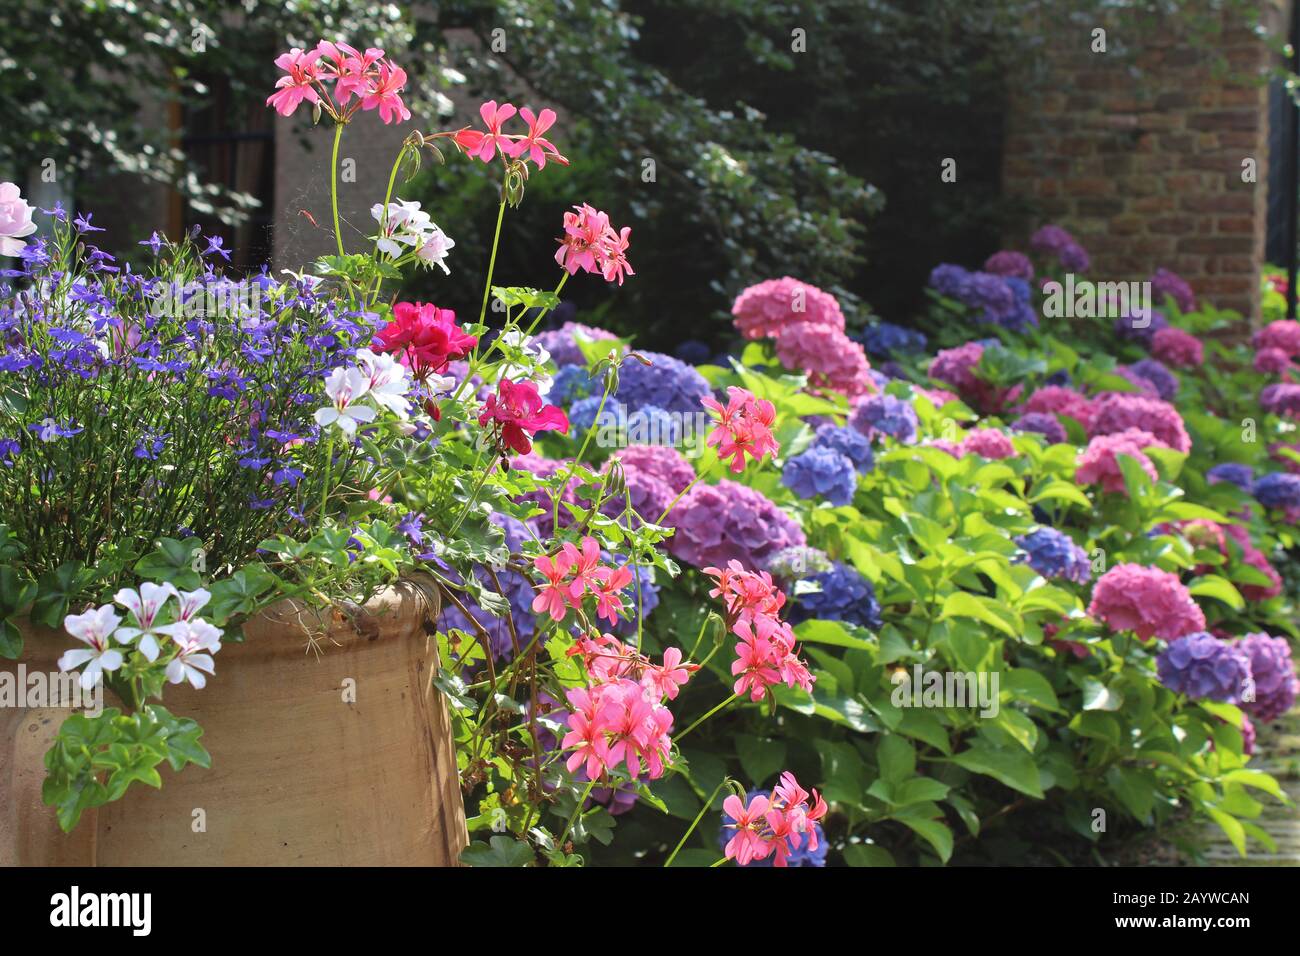 A beautiful pot full of summer bedding plants in full bloom, against a background of colorful hydrangeas. Summer garden in europe background, with cop Stock Photo